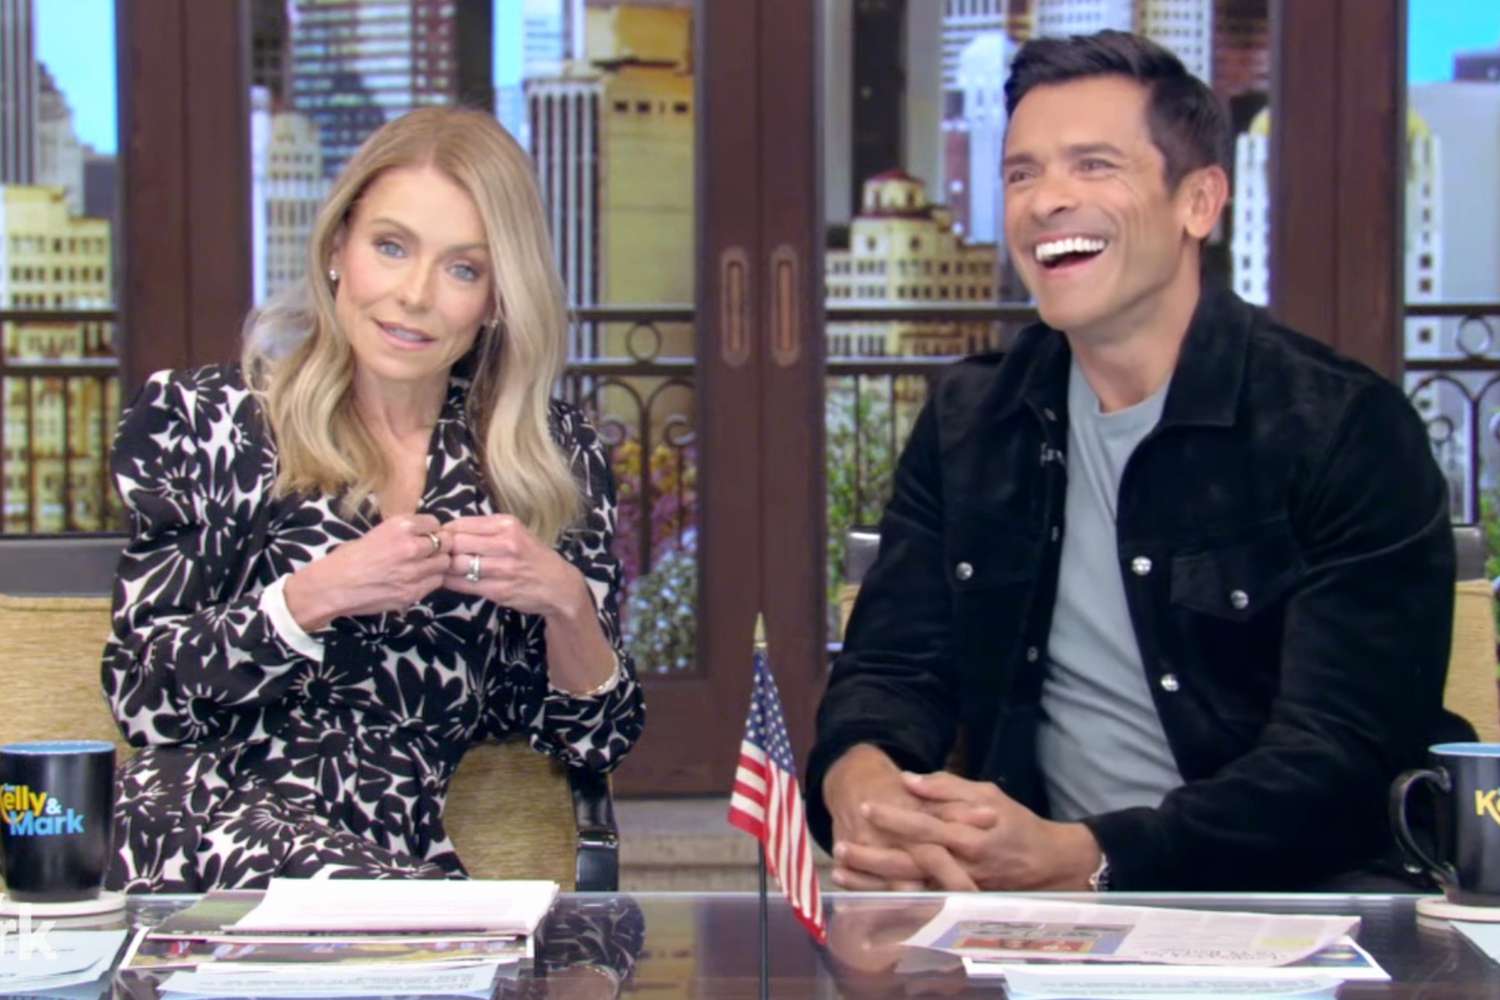 Kelly Ripa calls Mark Consuelos' feet 'monstrous,' says they might not be together if they met 'feet first'